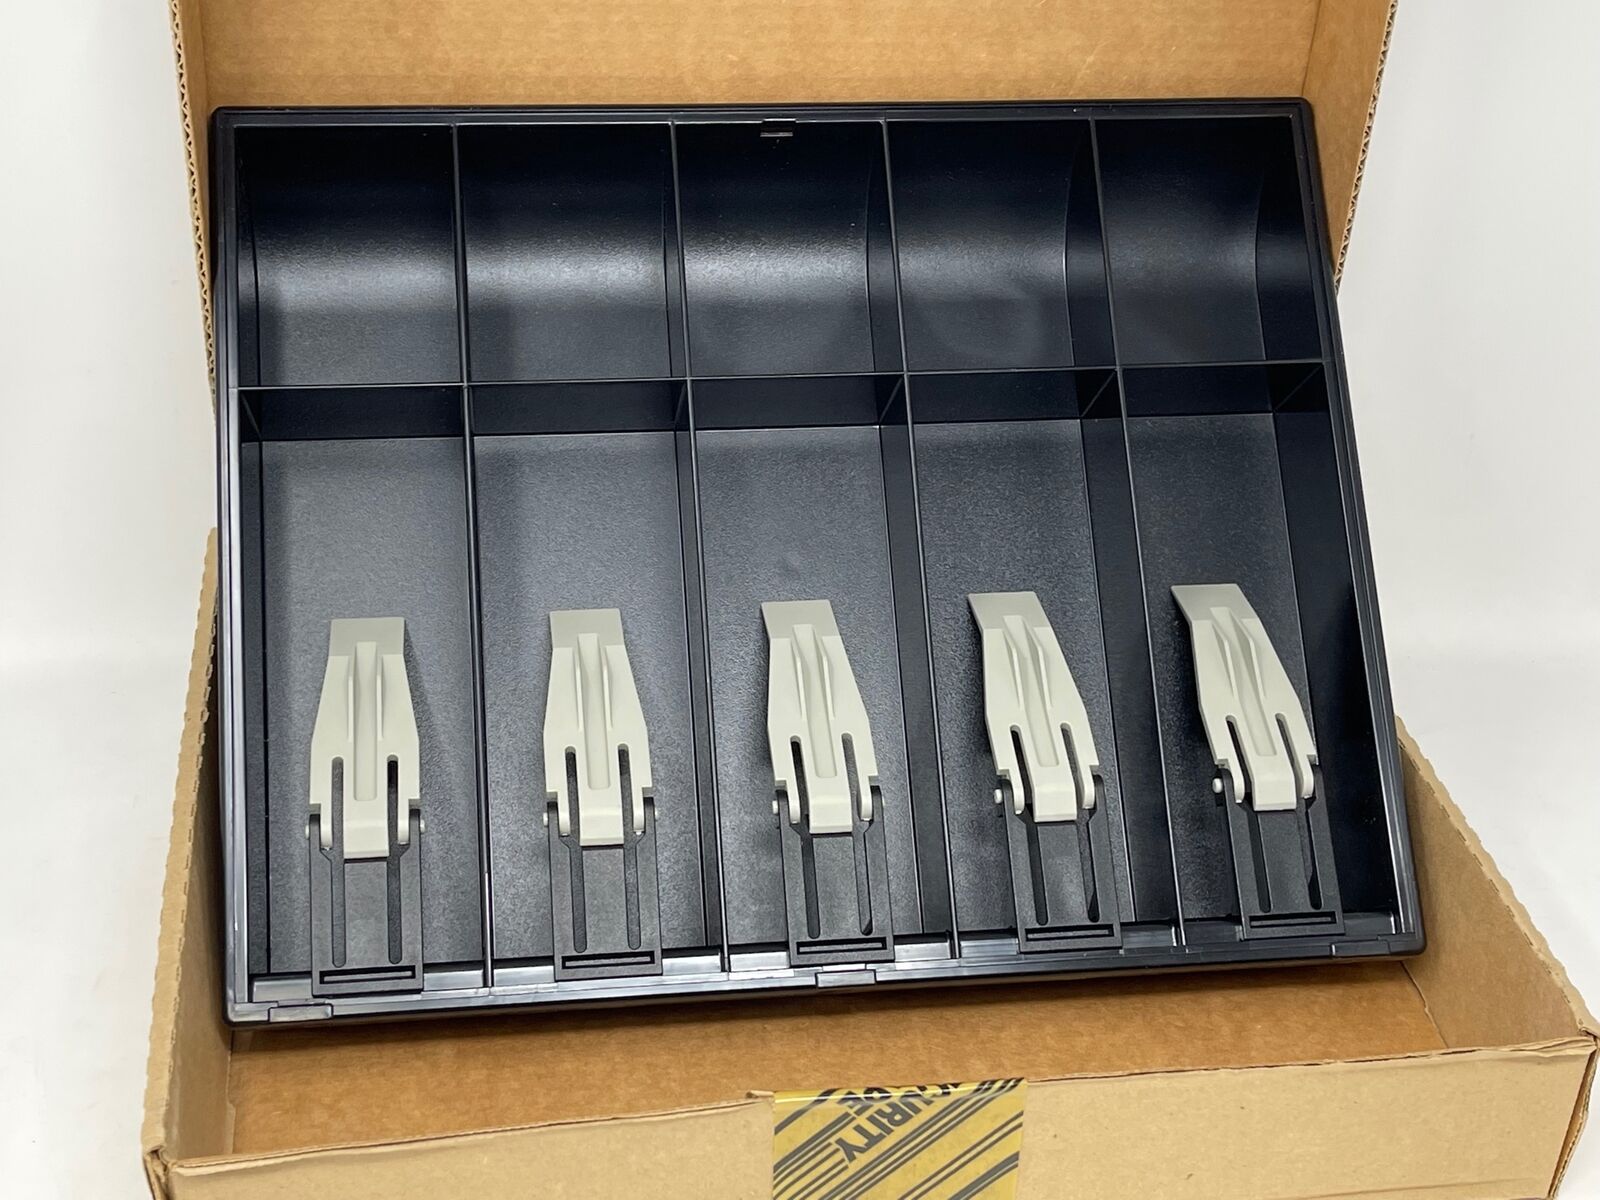 IBM OEM POS Point of Sale Plastic Cash Till / Drawer / Tray w Coin Cups 4783879